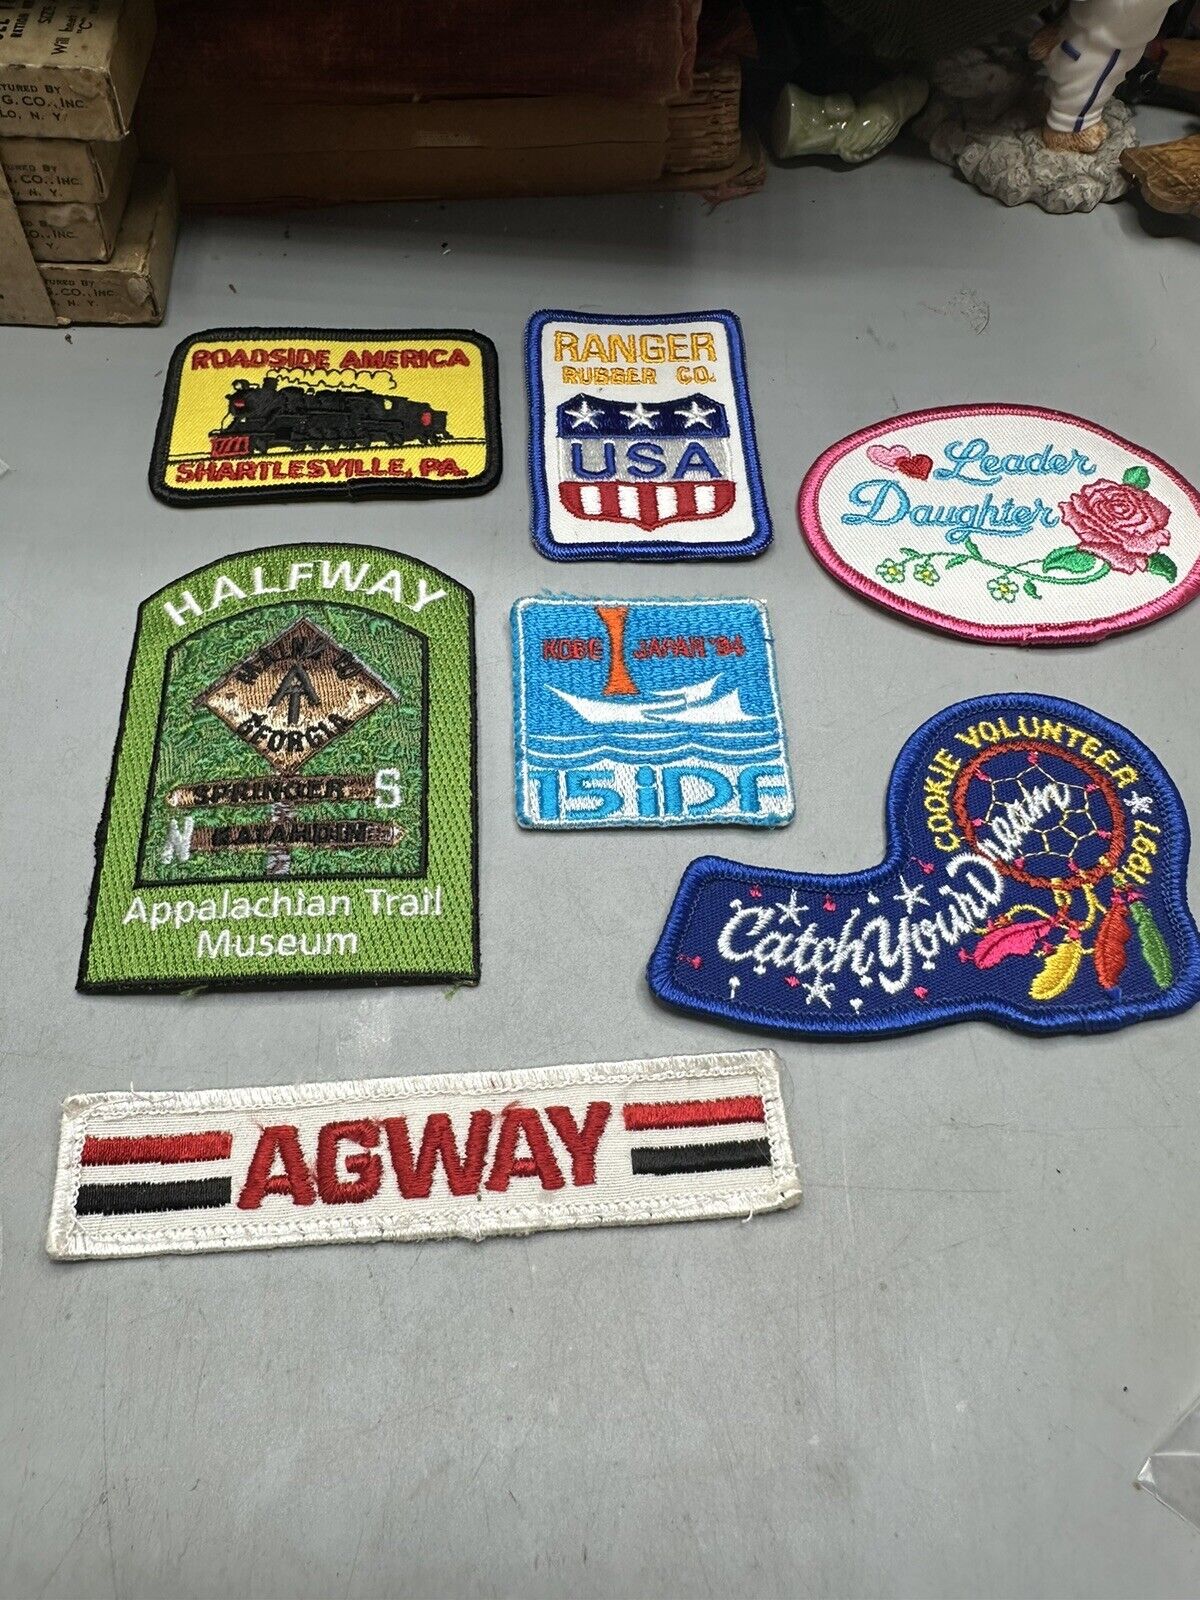 Mixed Lot Of 7 Patches - Roadside America, Agway, 1994 Olympics,Girl Scouts, Etc